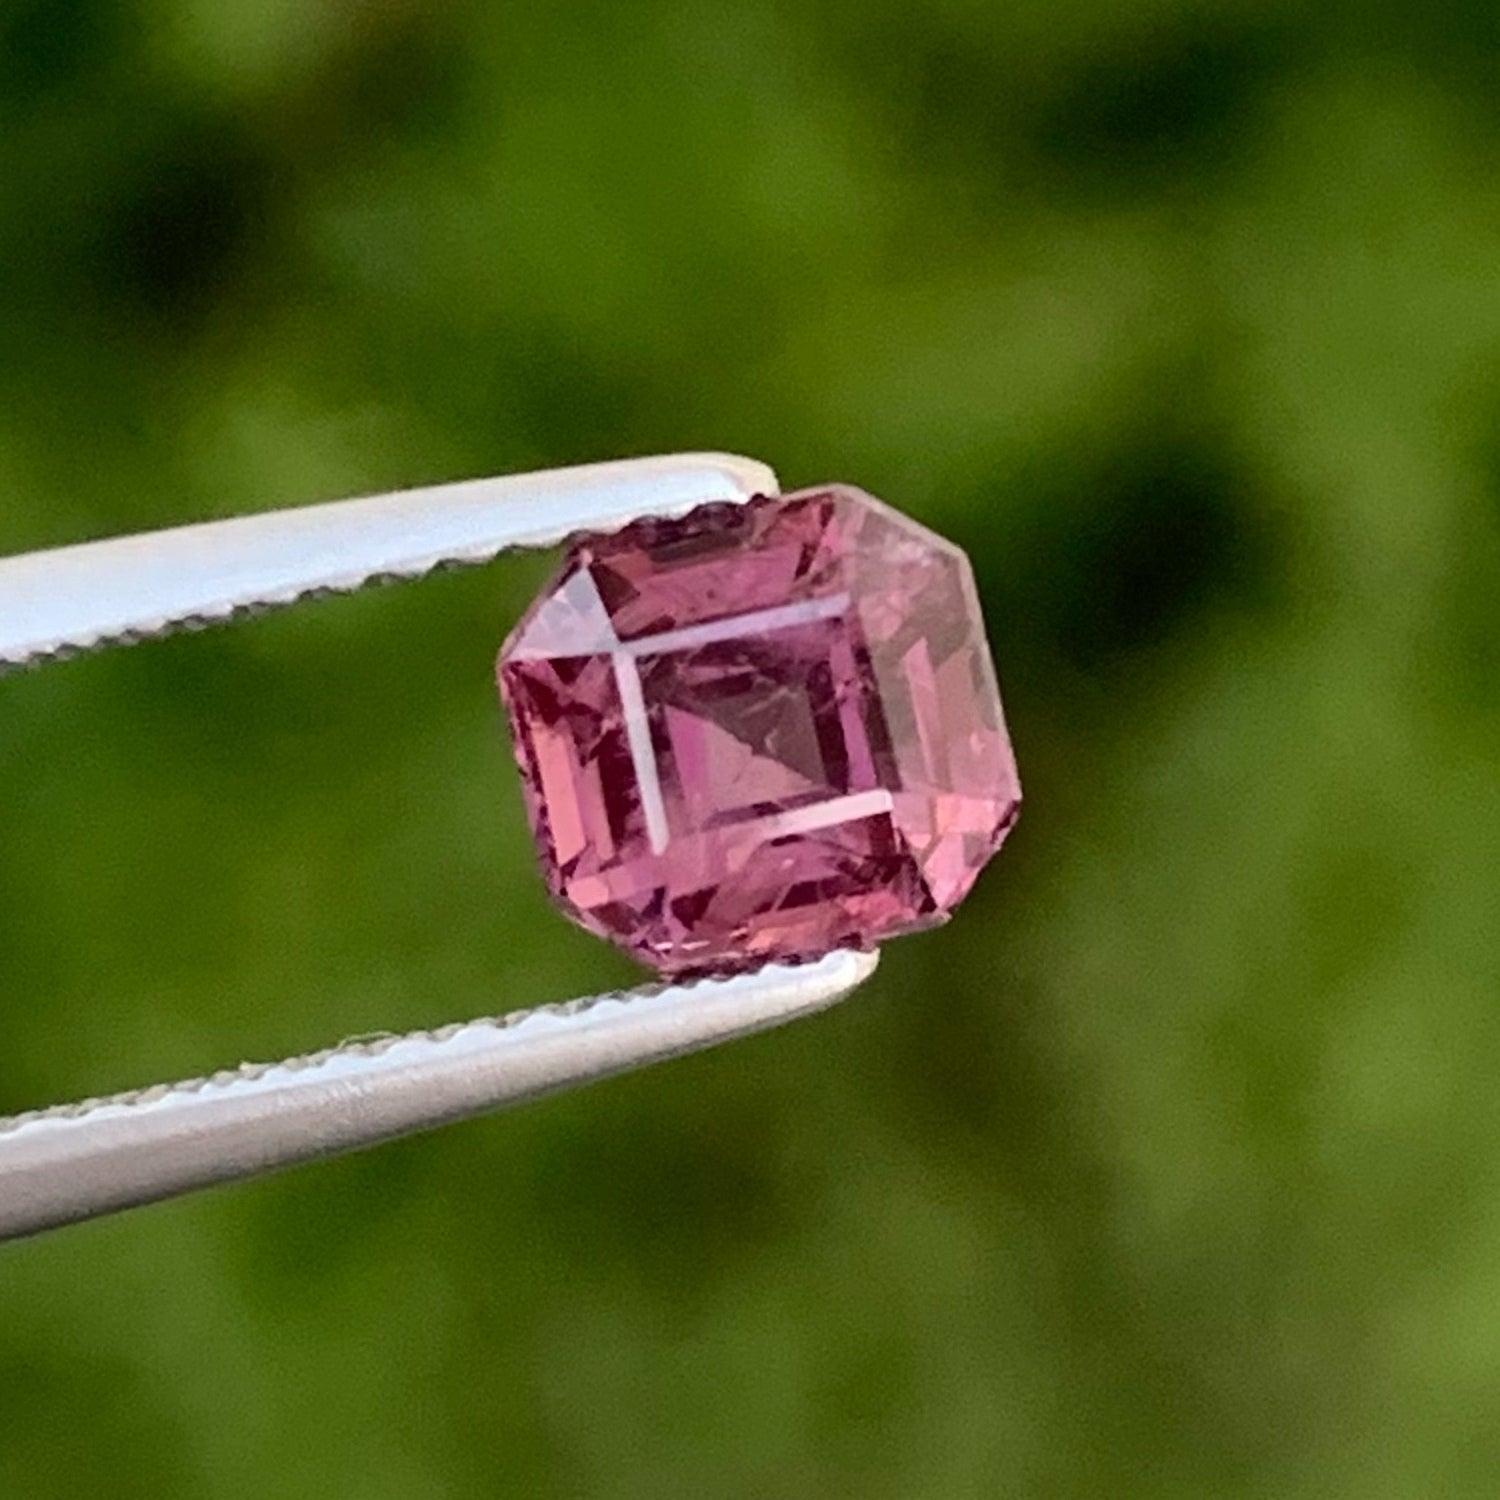 Modern Natural Purple Cut Spinel Gem 1.20 CTS Brilliant Asscher Cut Spinel for Jewelry For Sale